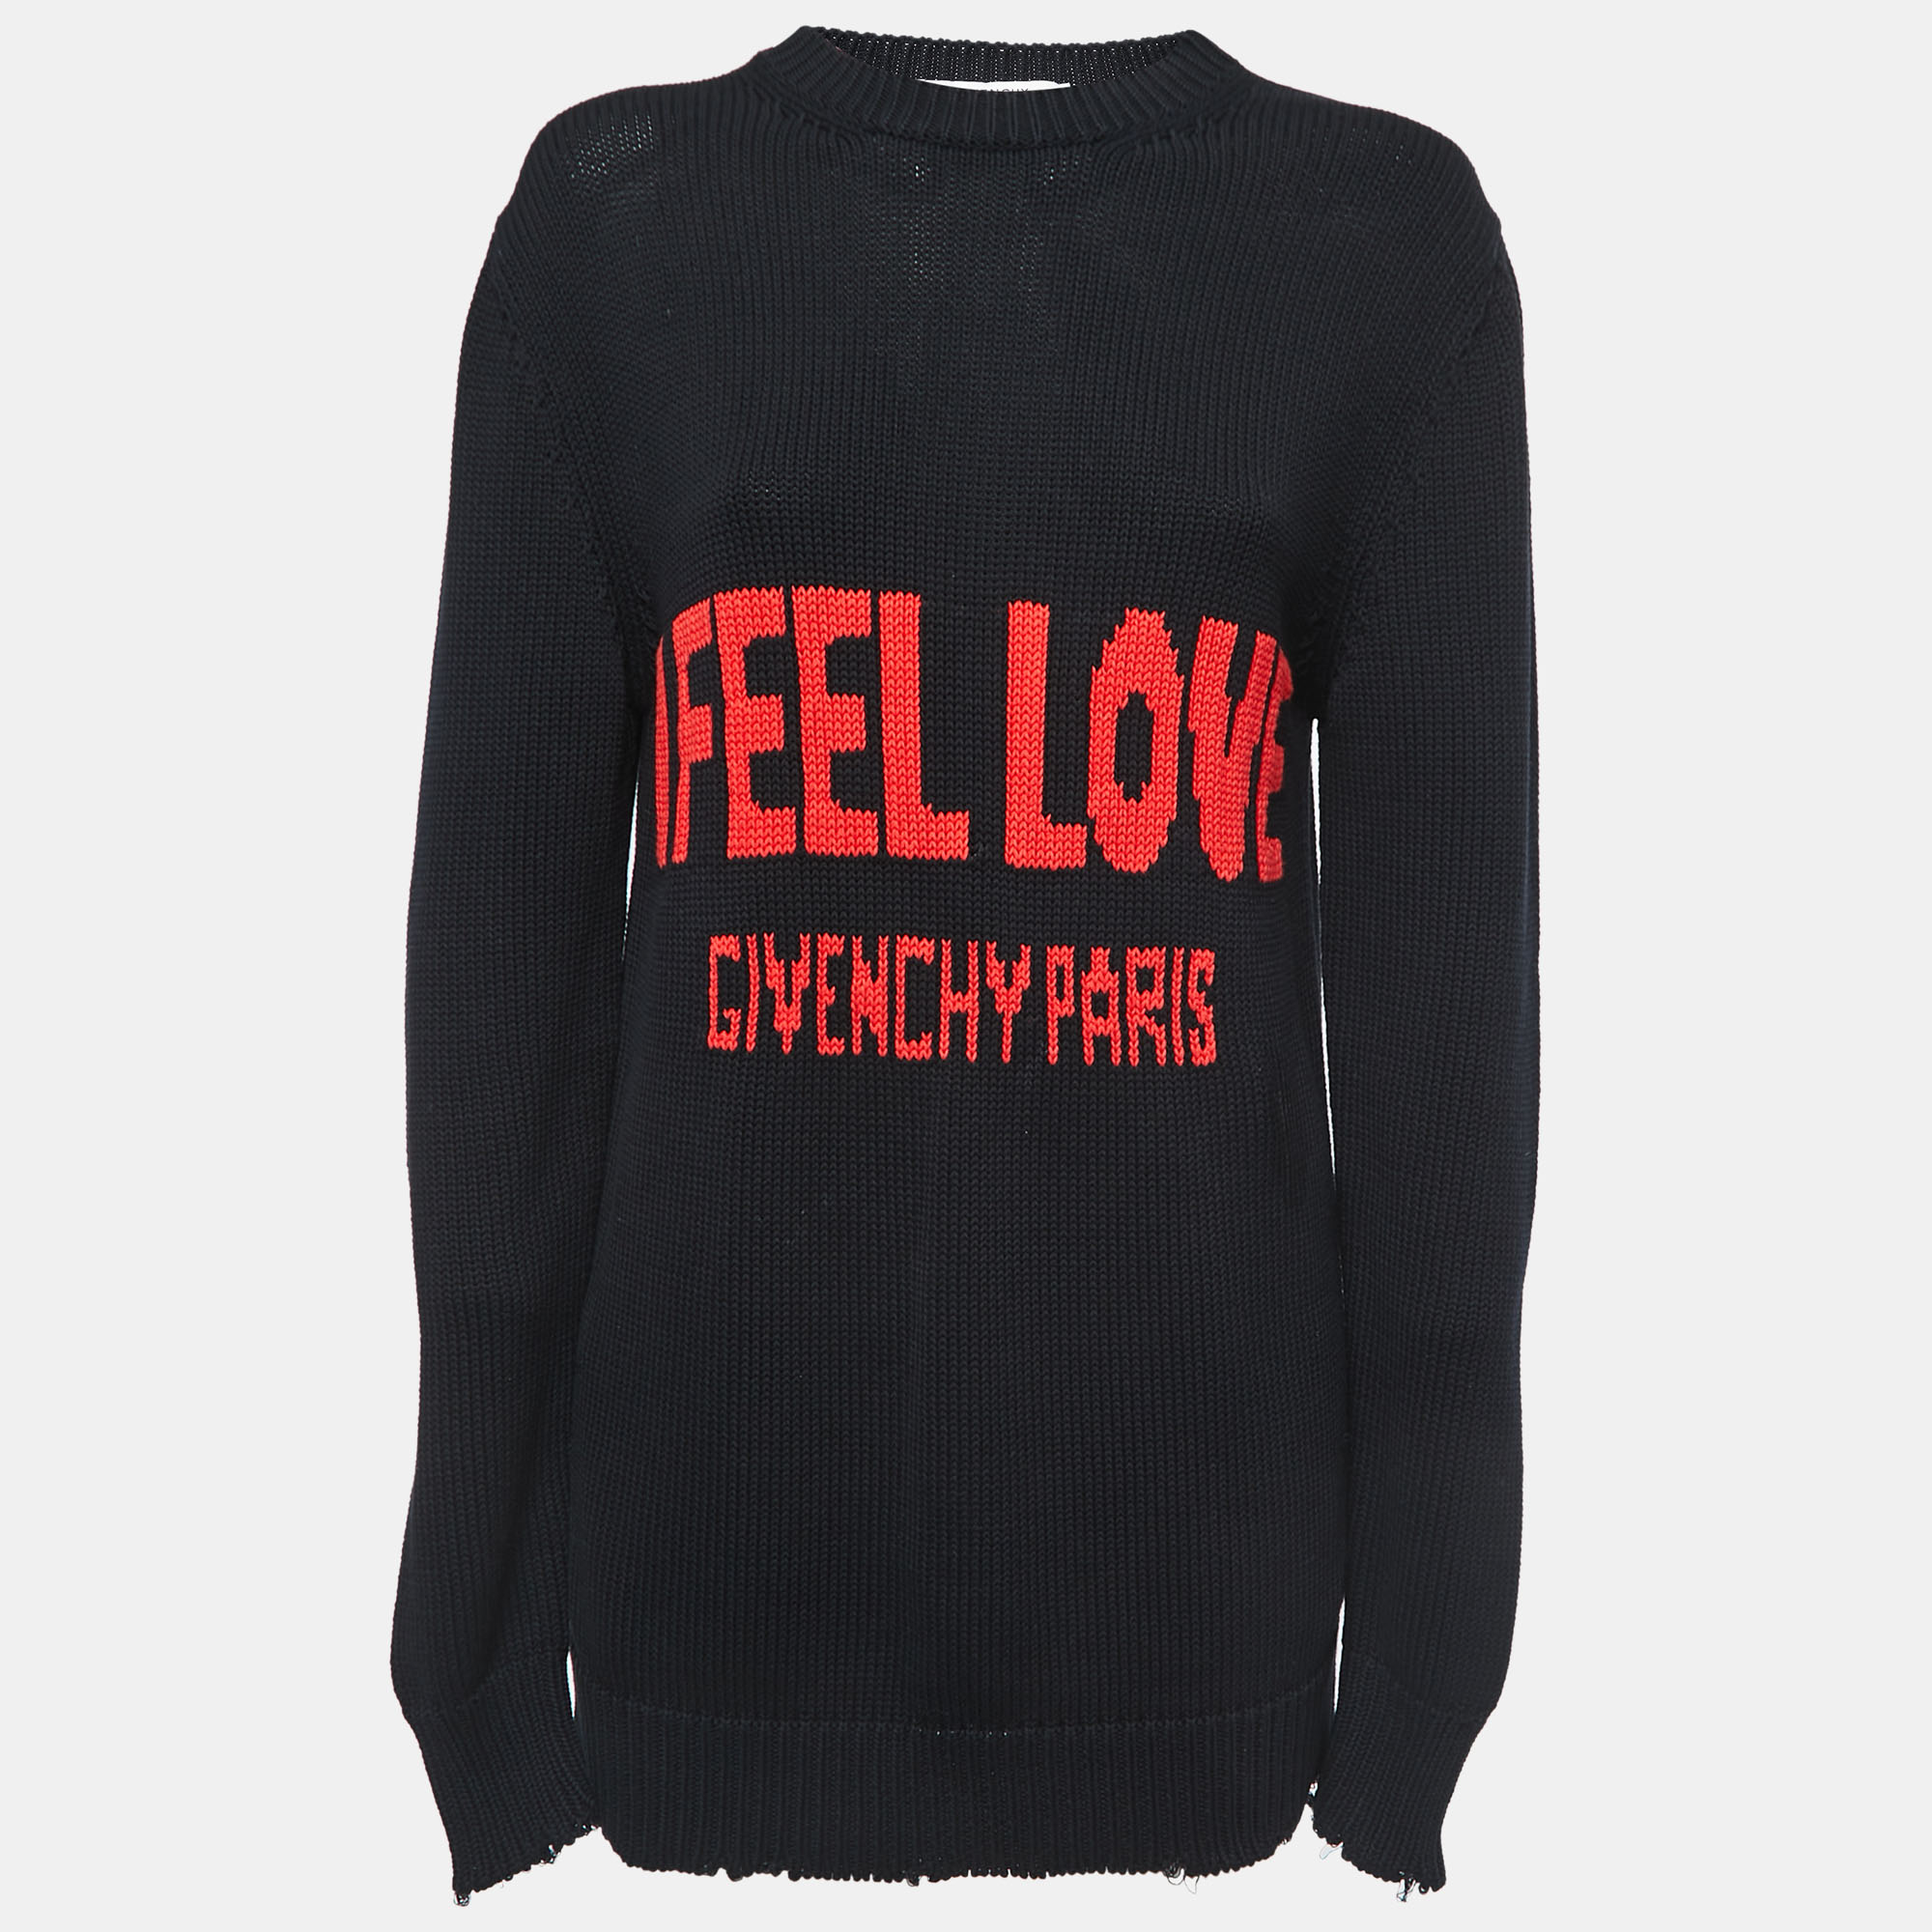 Givenchy Black I Feel Love Cotton Knit Crew Neck Jumper S